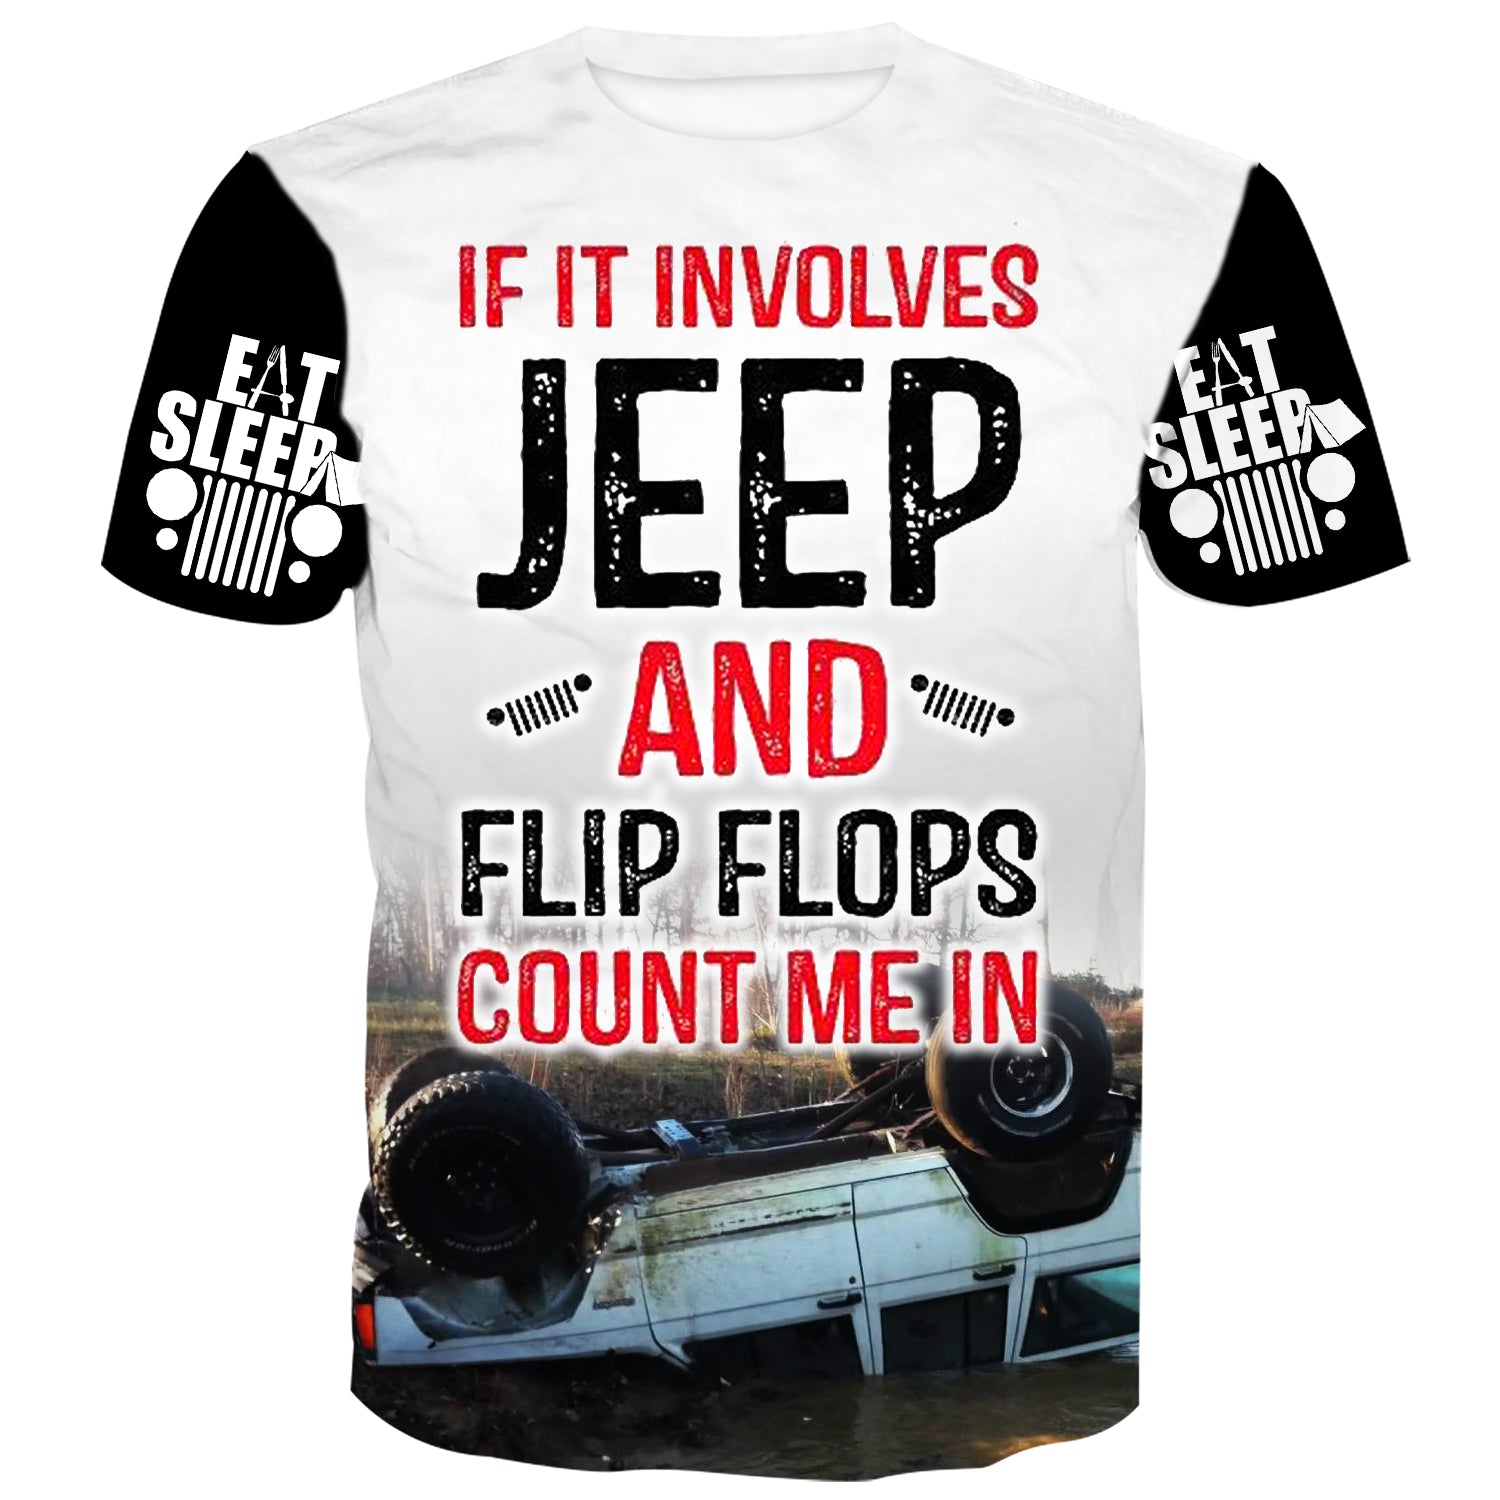 If it involves Jeep and Flip Flops count me in - T-Shirt